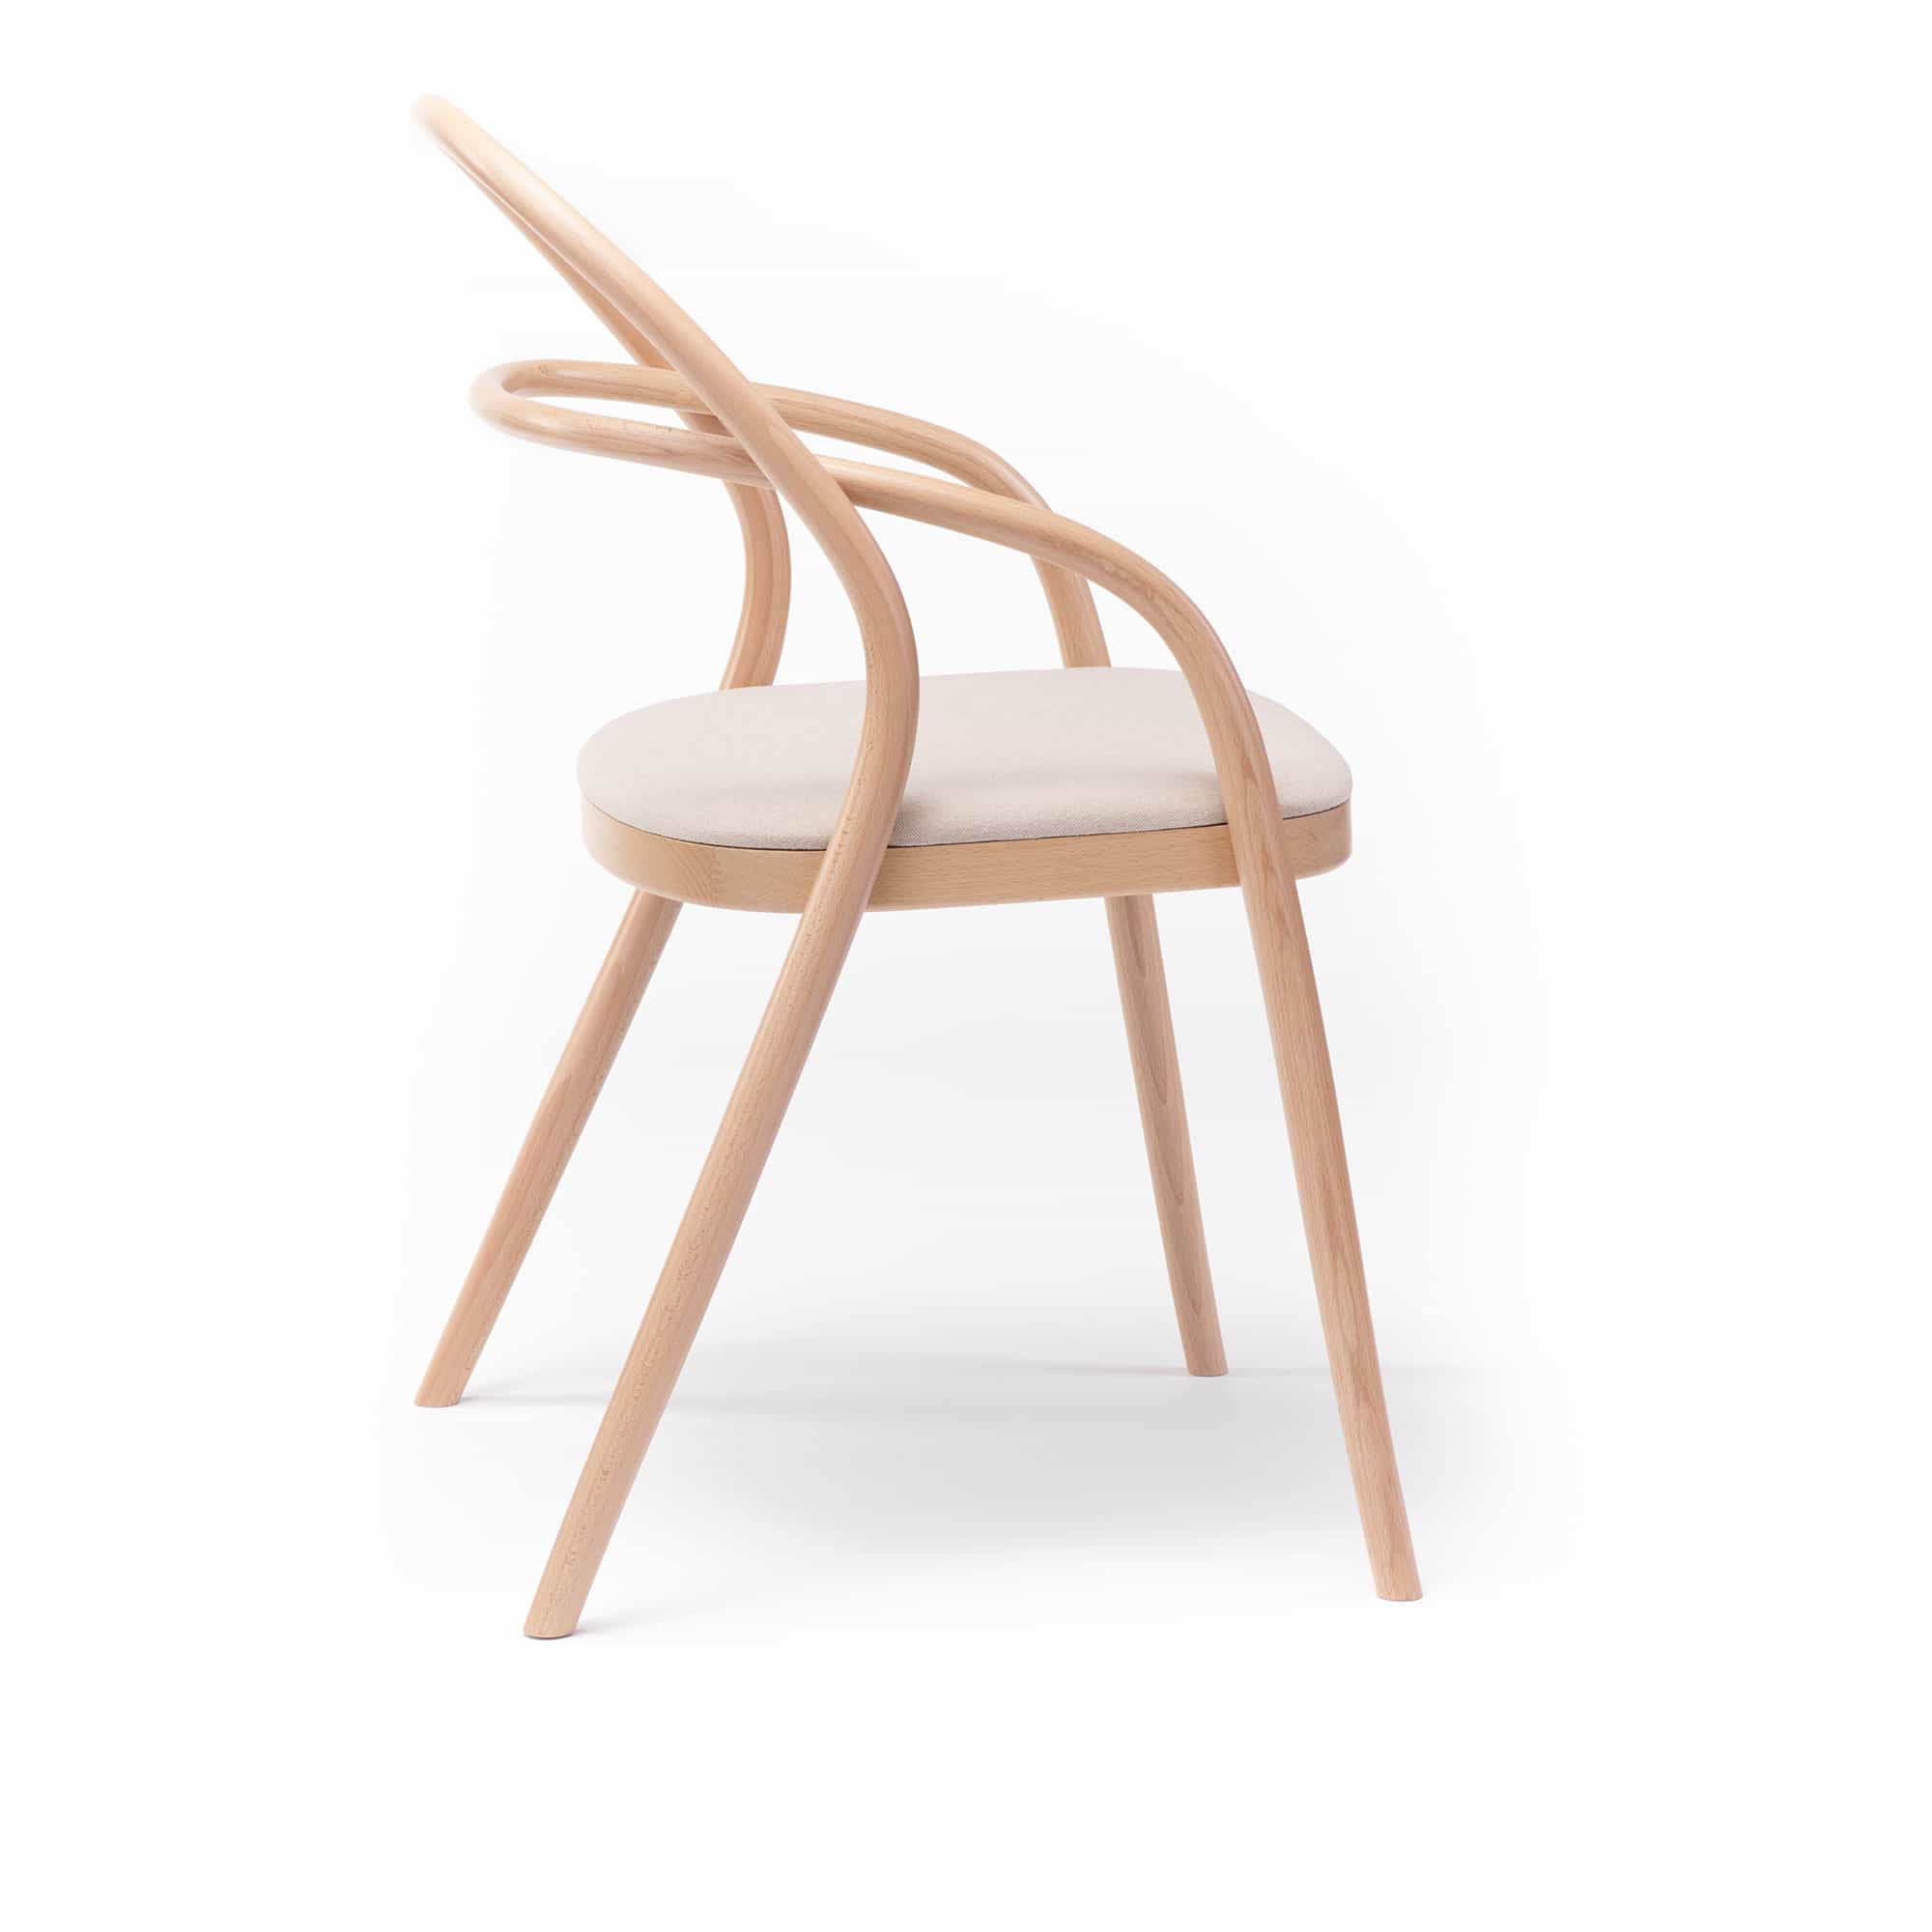 002 Chair Natural Beech Lacquered Jet Bioactive 9110